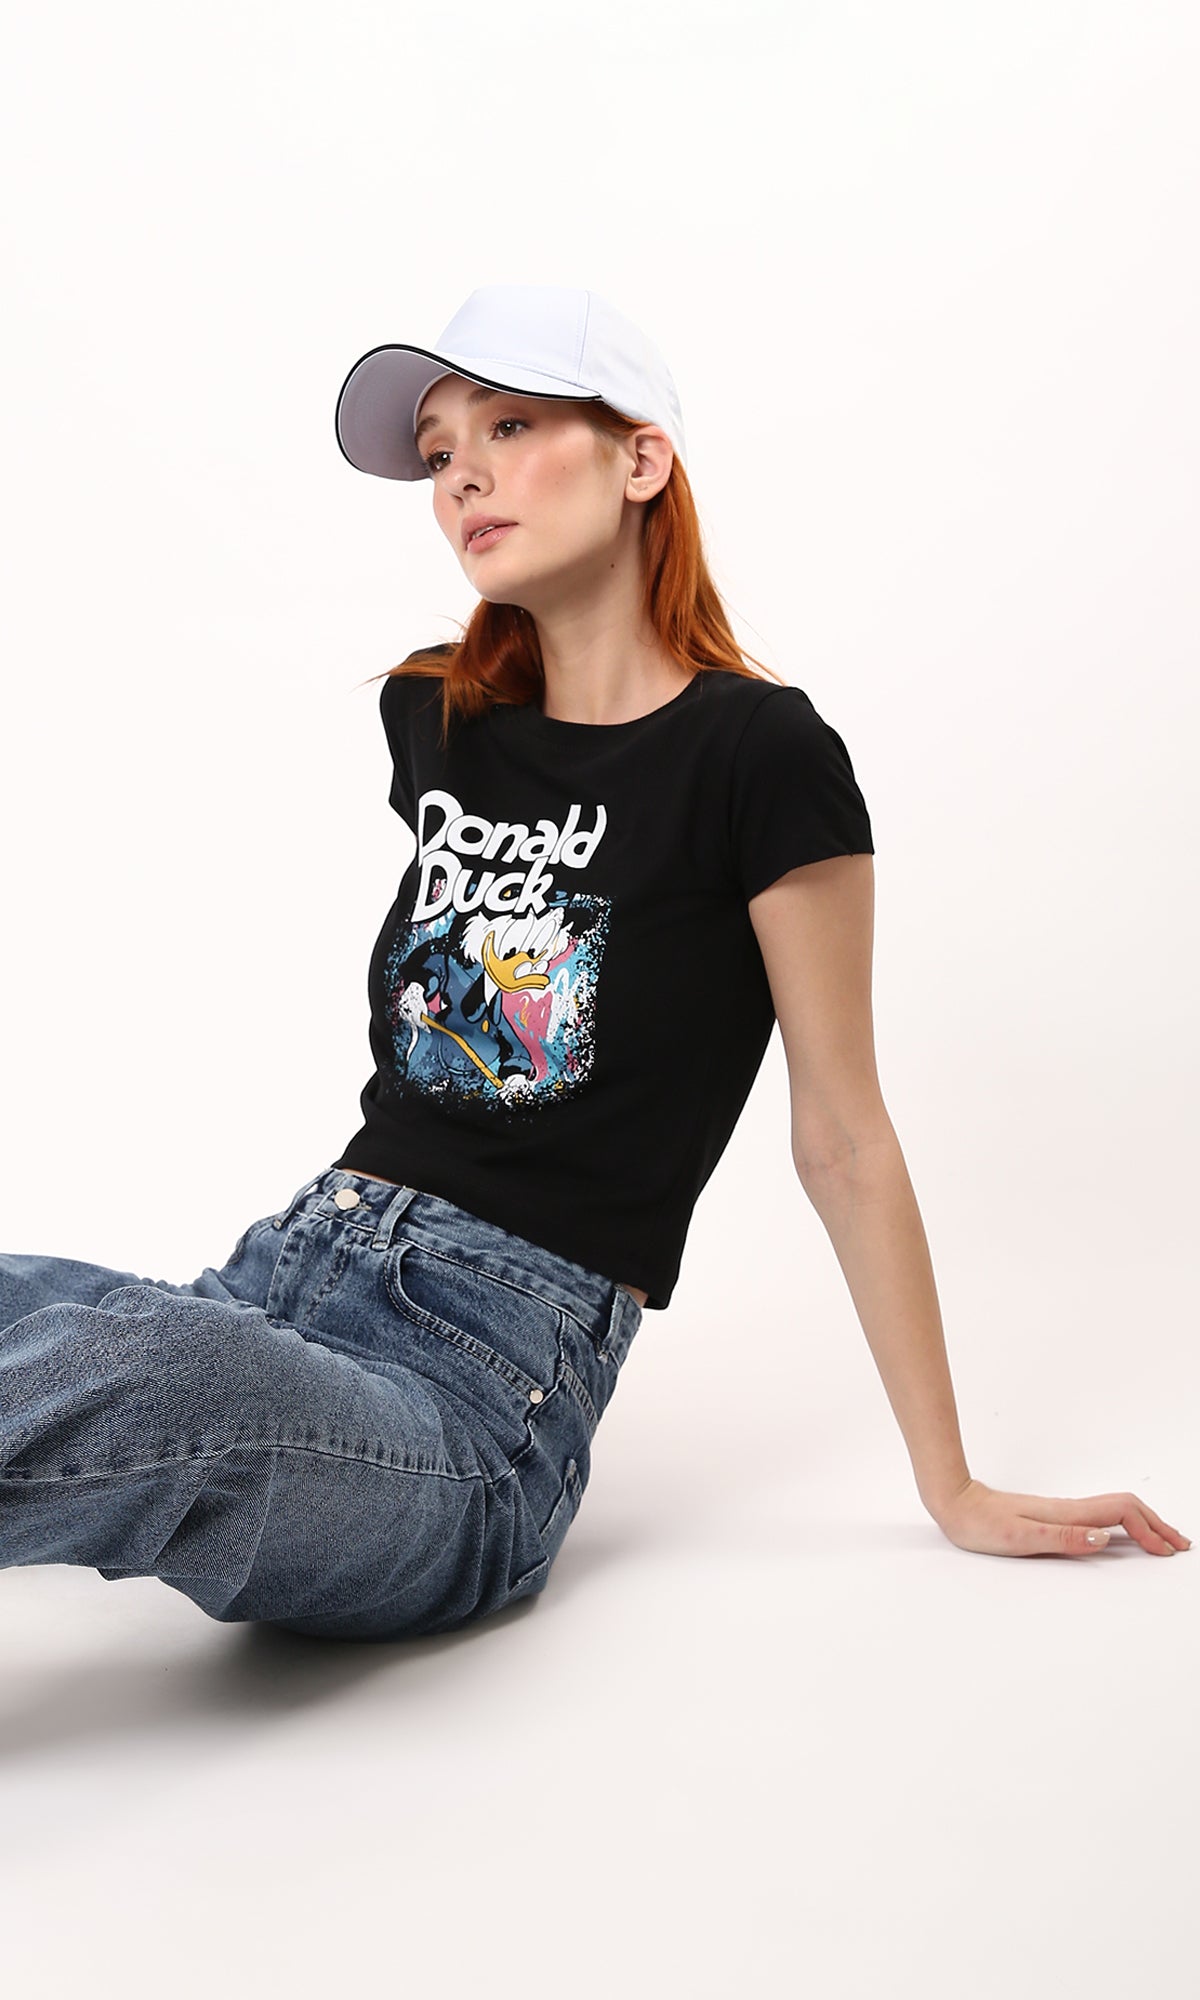 O183075 Short Sleeves Black Tee With "Donald Duck" Print